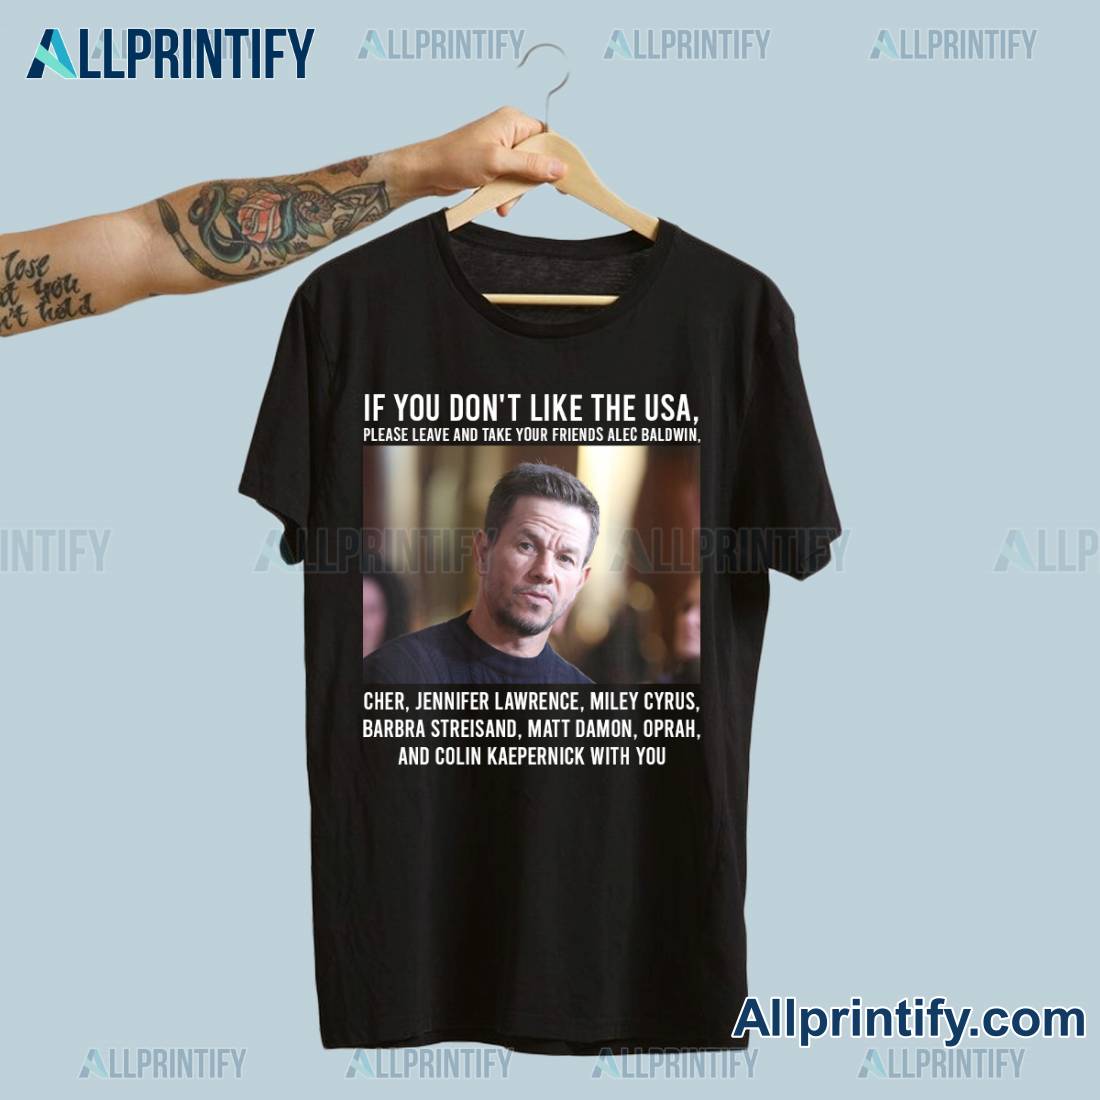 If You Don't Like The Usa, Please Leave And Take Your Friends Alec Baldwin, Cher, Jennifer Lawrence, Miley Cyrus, Barbra Streisand, Matt Damon, Oprah, And Colin Kaepernick With You Shirt